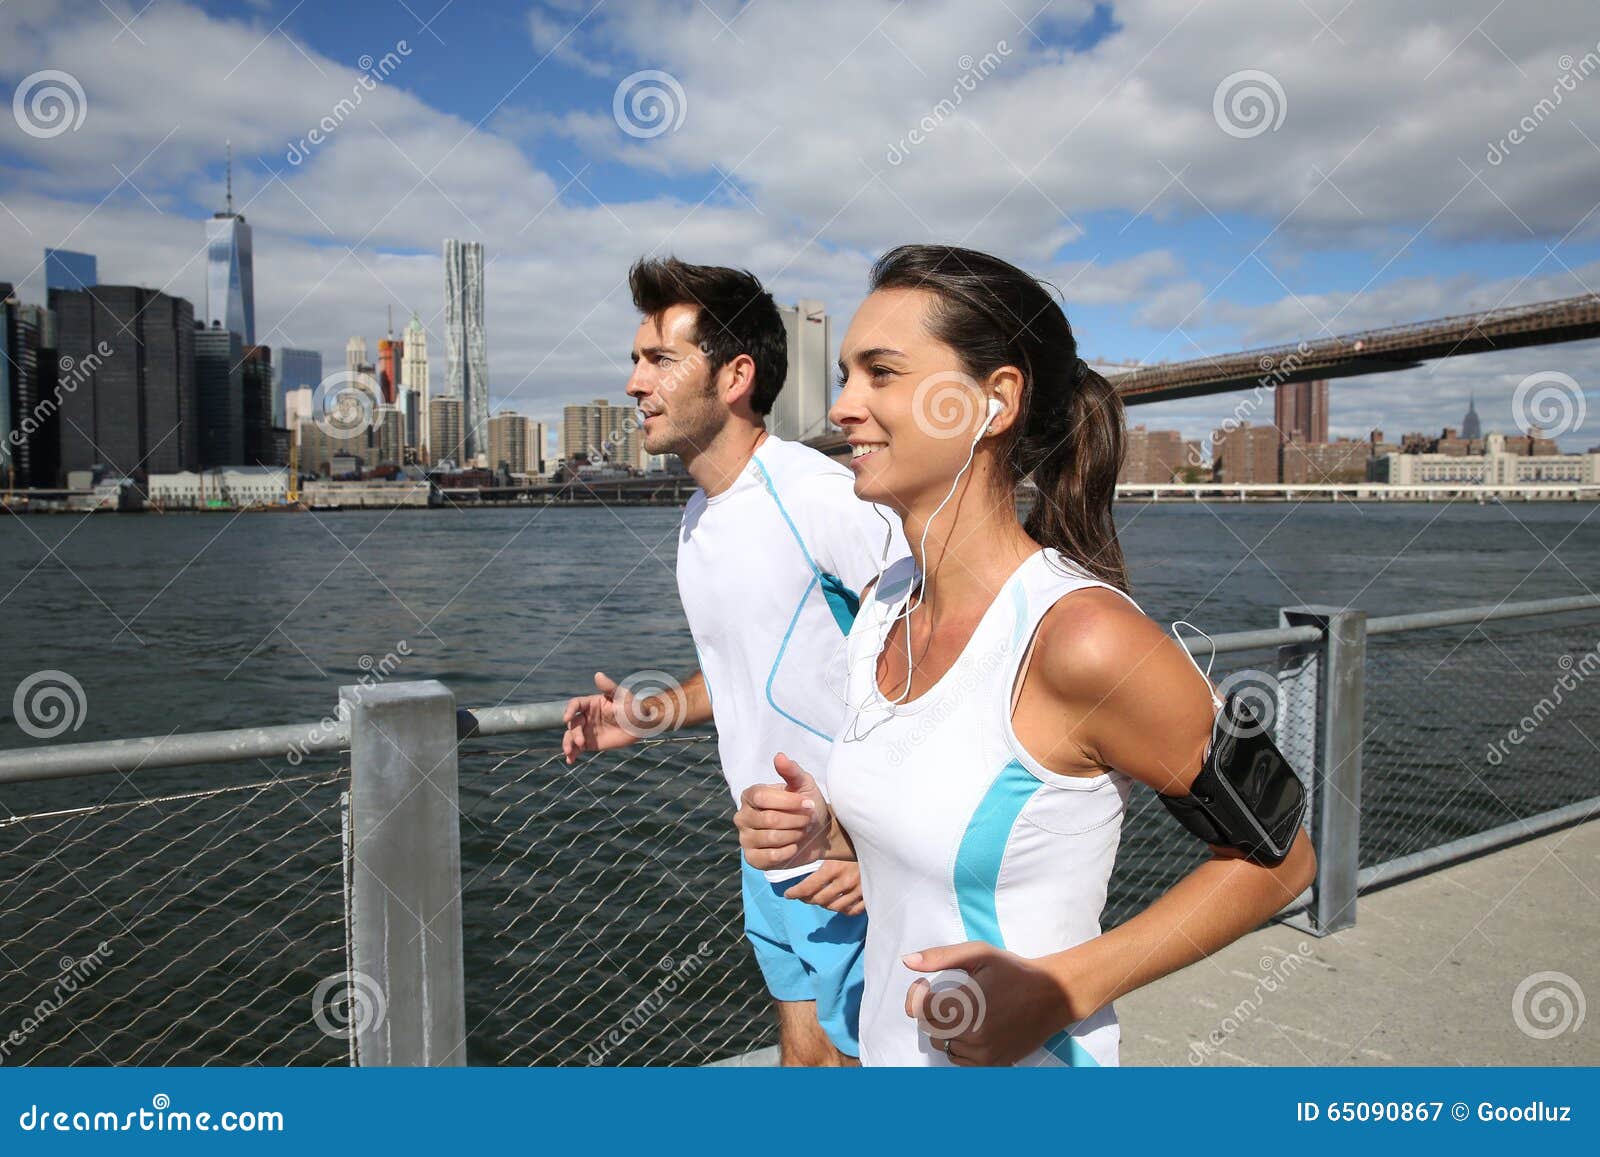 couple of joggers by hudson river